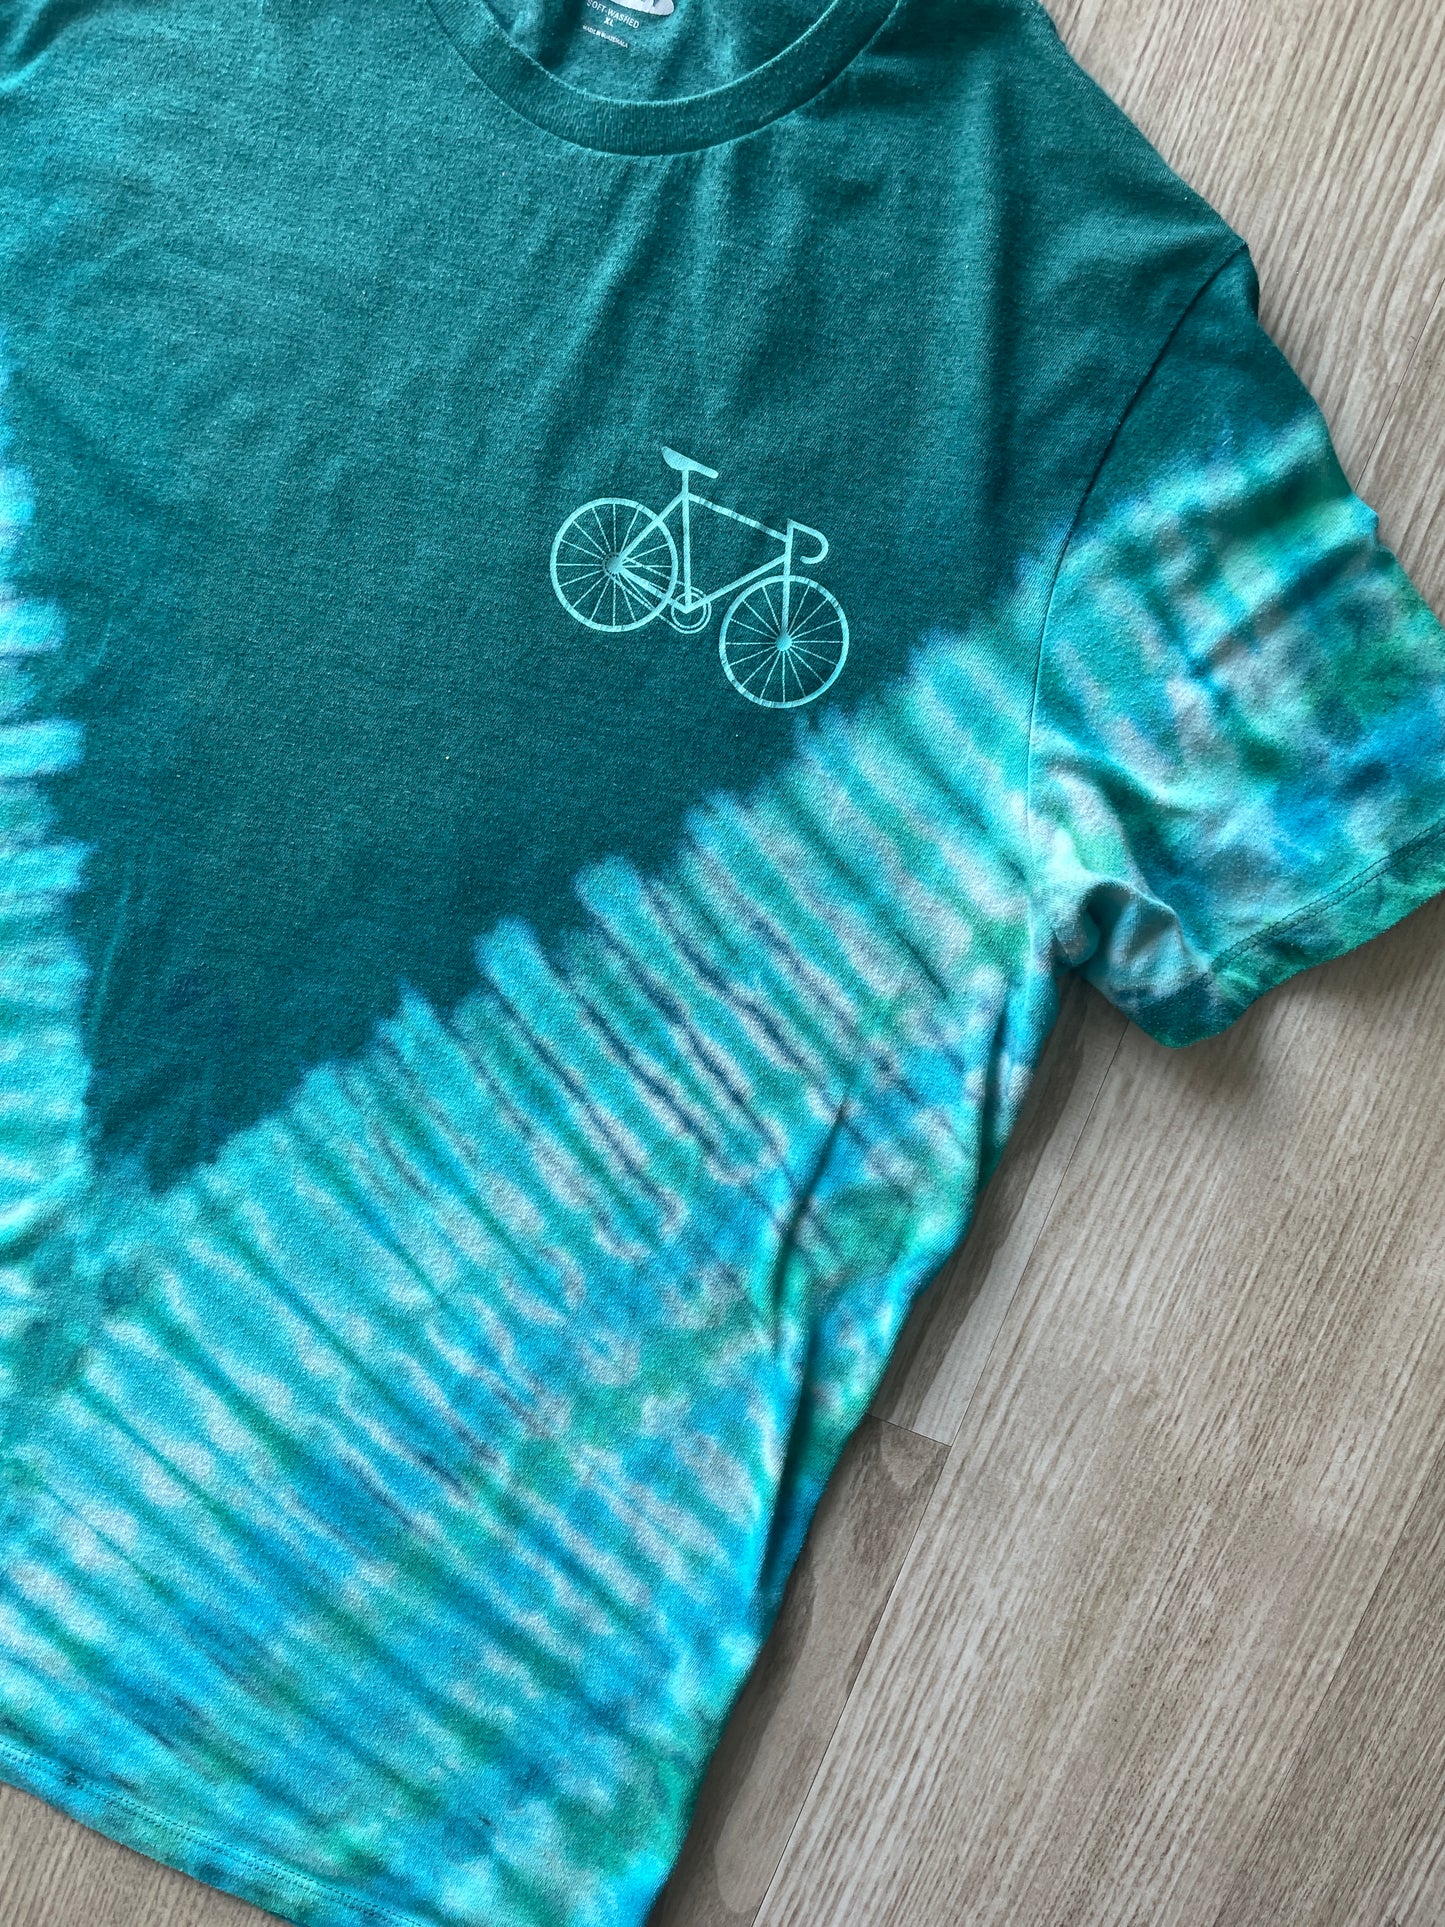 XL Men’s Bicycle Clean Energy Vehicle Handmade Reverse Tie Dye T-Shirt | One-Of-a-Kind Blue and Green Short Sleeve